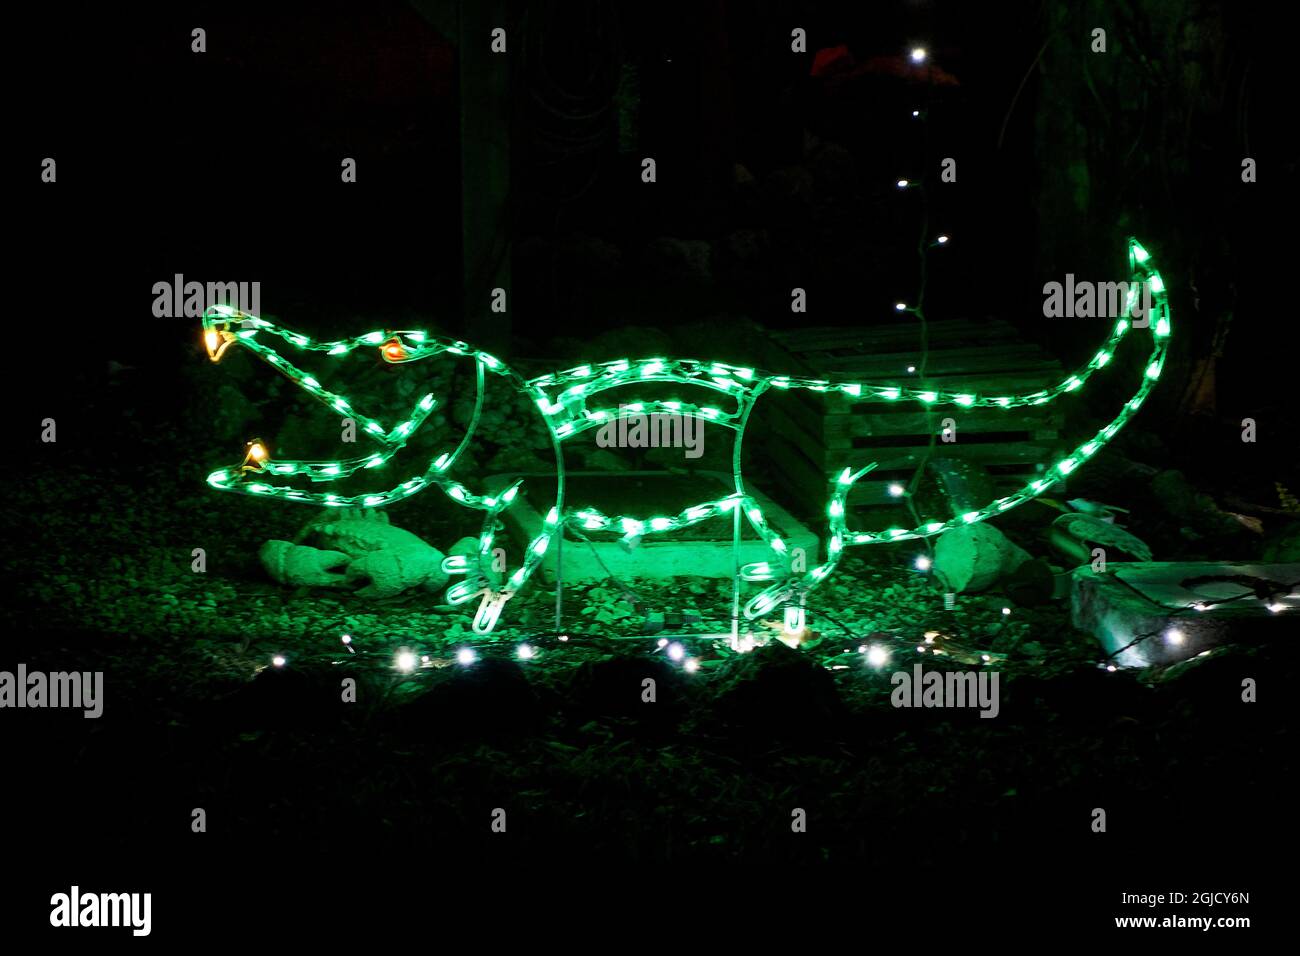 USA, Florida, Sanibel Island. Alligator Christmas lawn display. Sanibel is a barrier island known for beach shelling and the Ding Darling National Wil Stock Photo